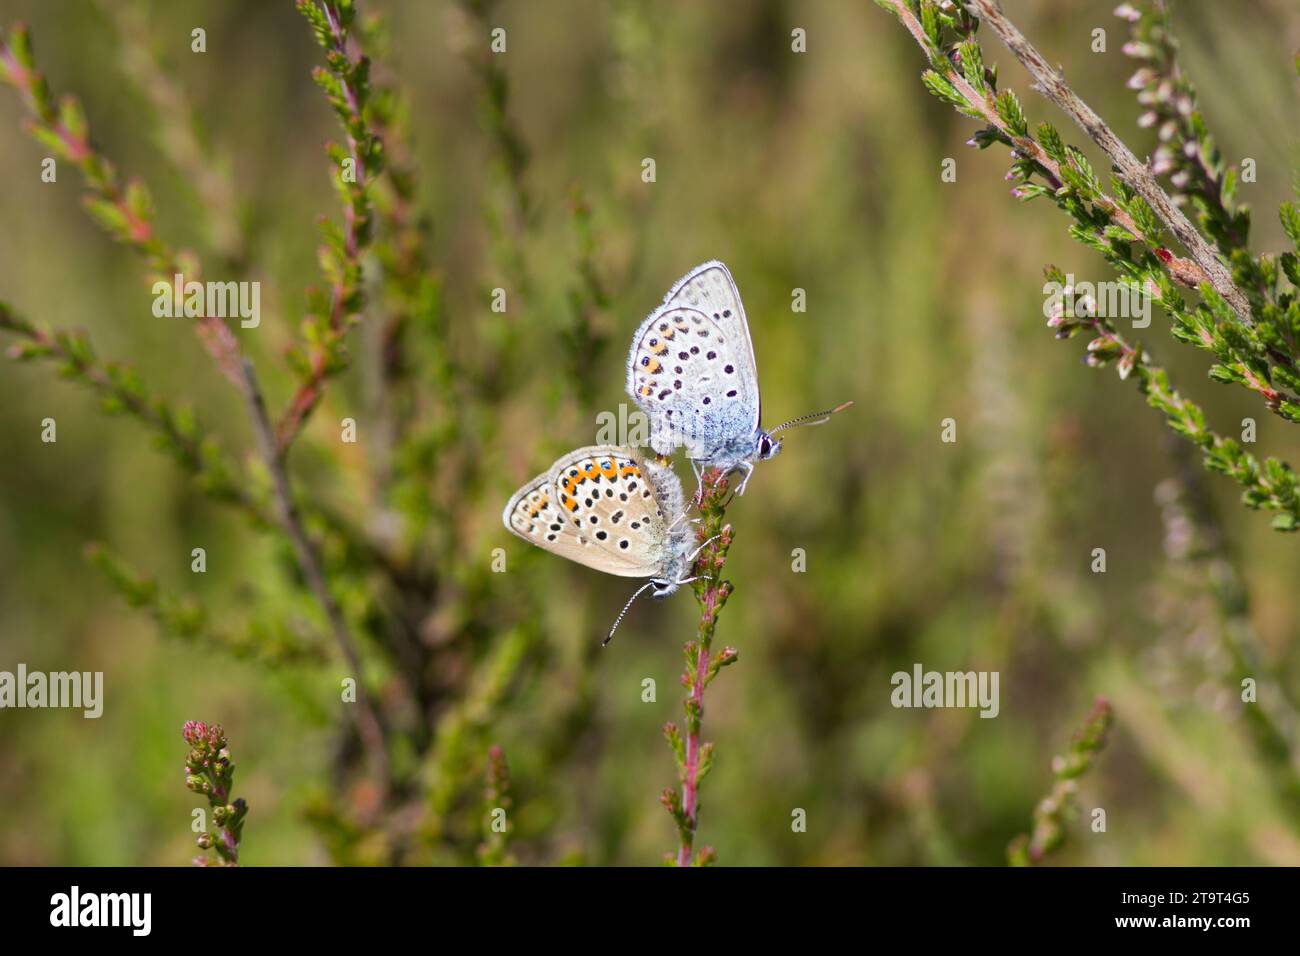 Mating Pair of Silver-Studded Blue Butterflies, Prees Heath, Shropshire, UK Stock Photo